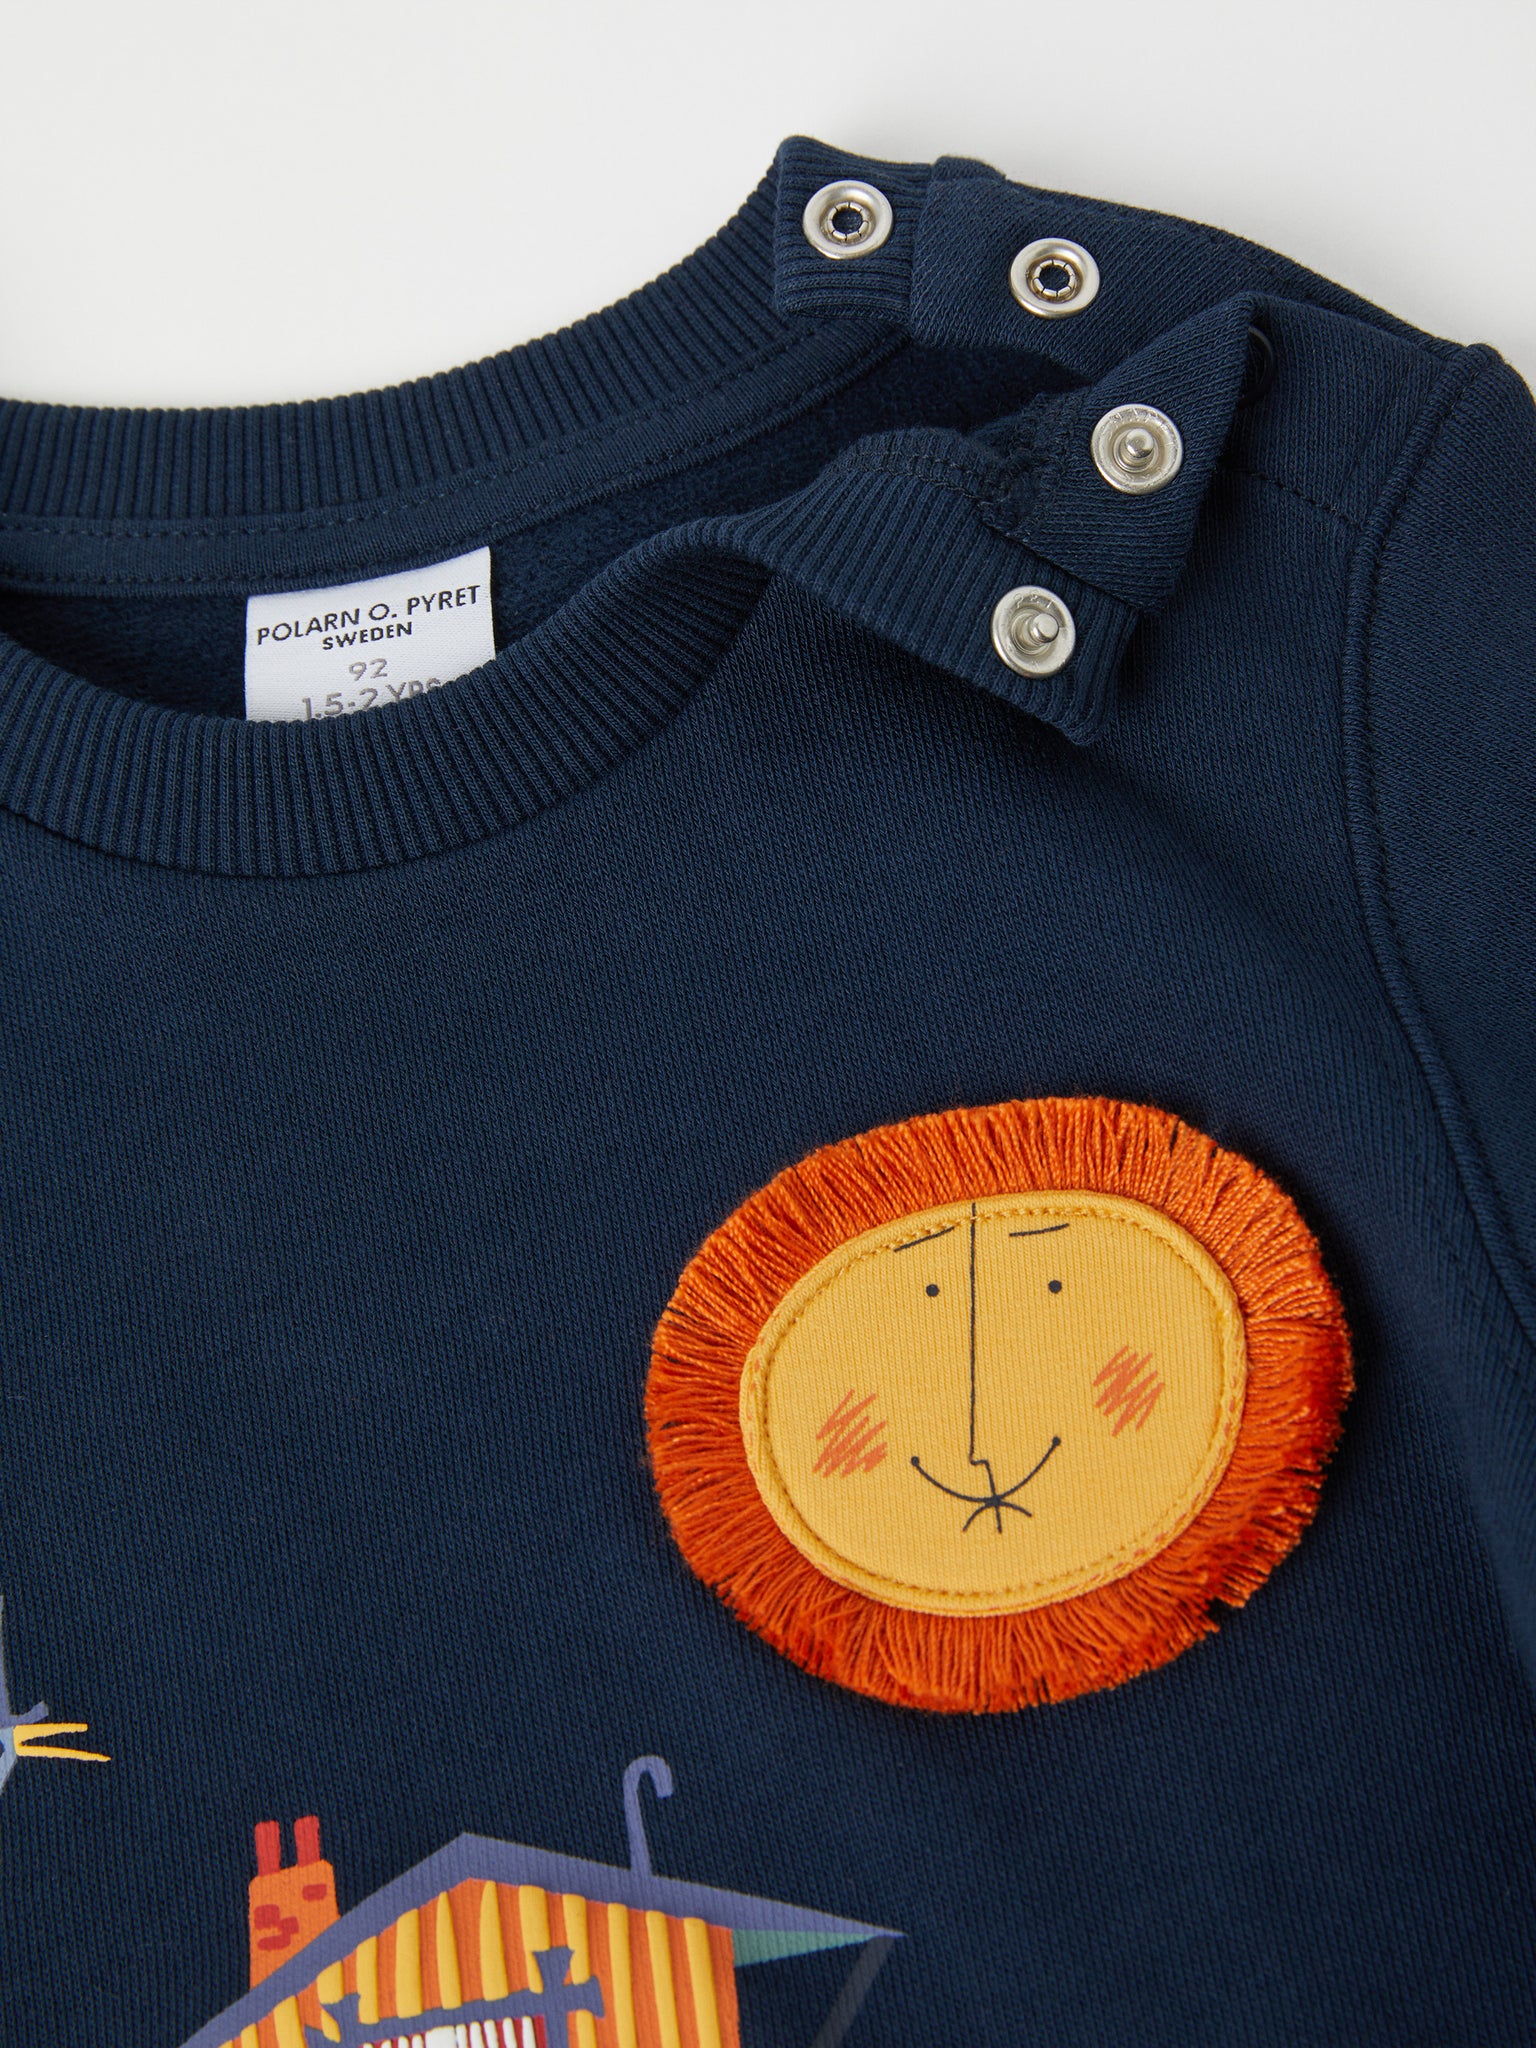 Scandi Organic Cotton Kids Sweatshirt from the Polarn O. Pyret kidswear collection. Ethically produced kids clothing.